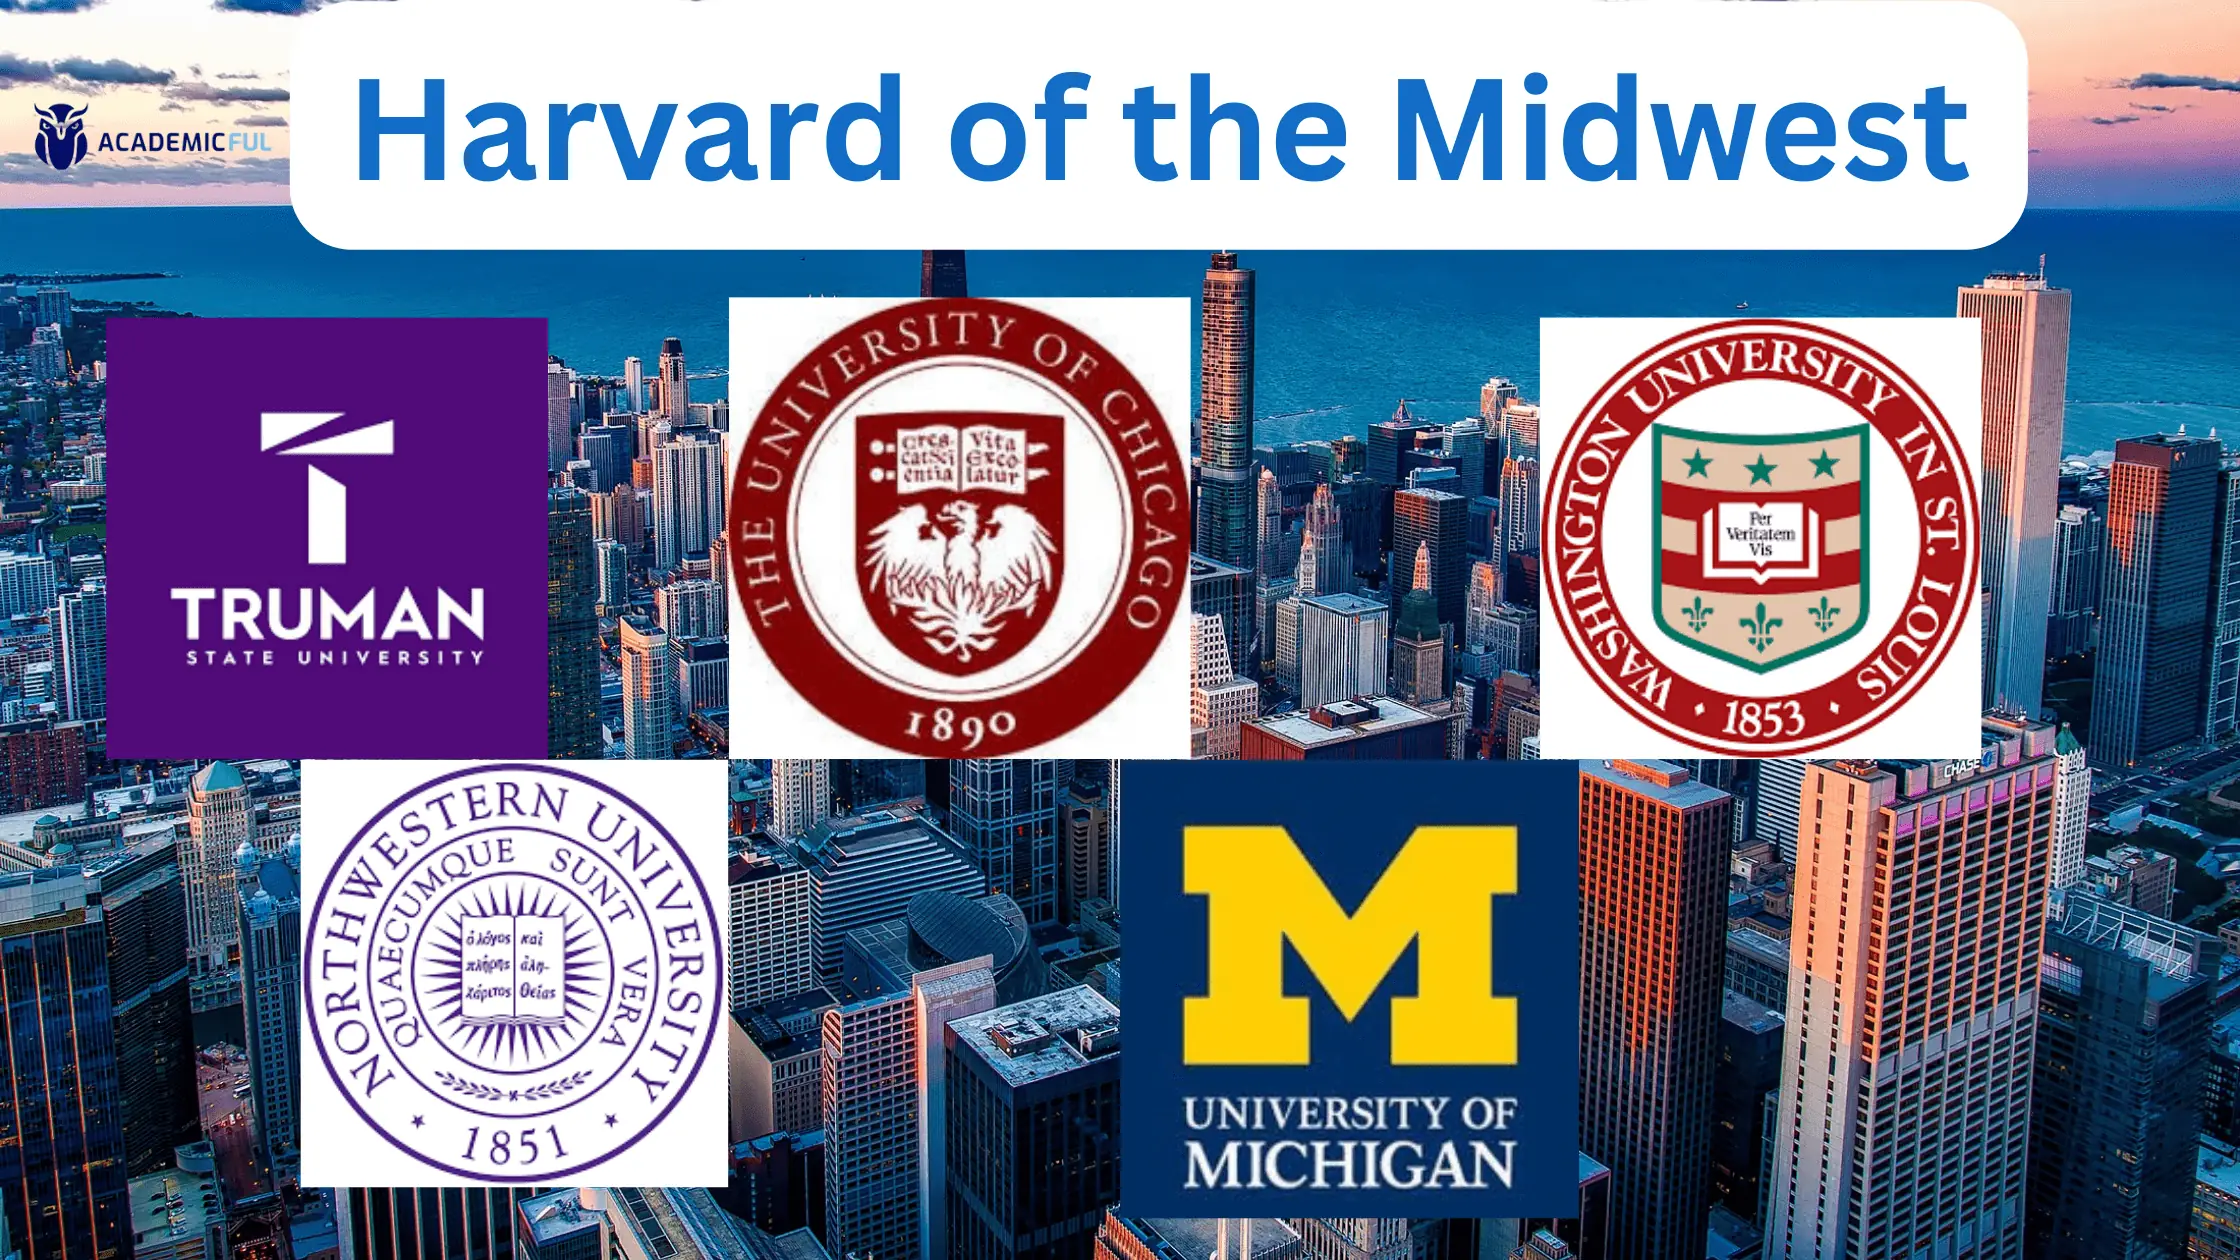 Harvard of the Midwest